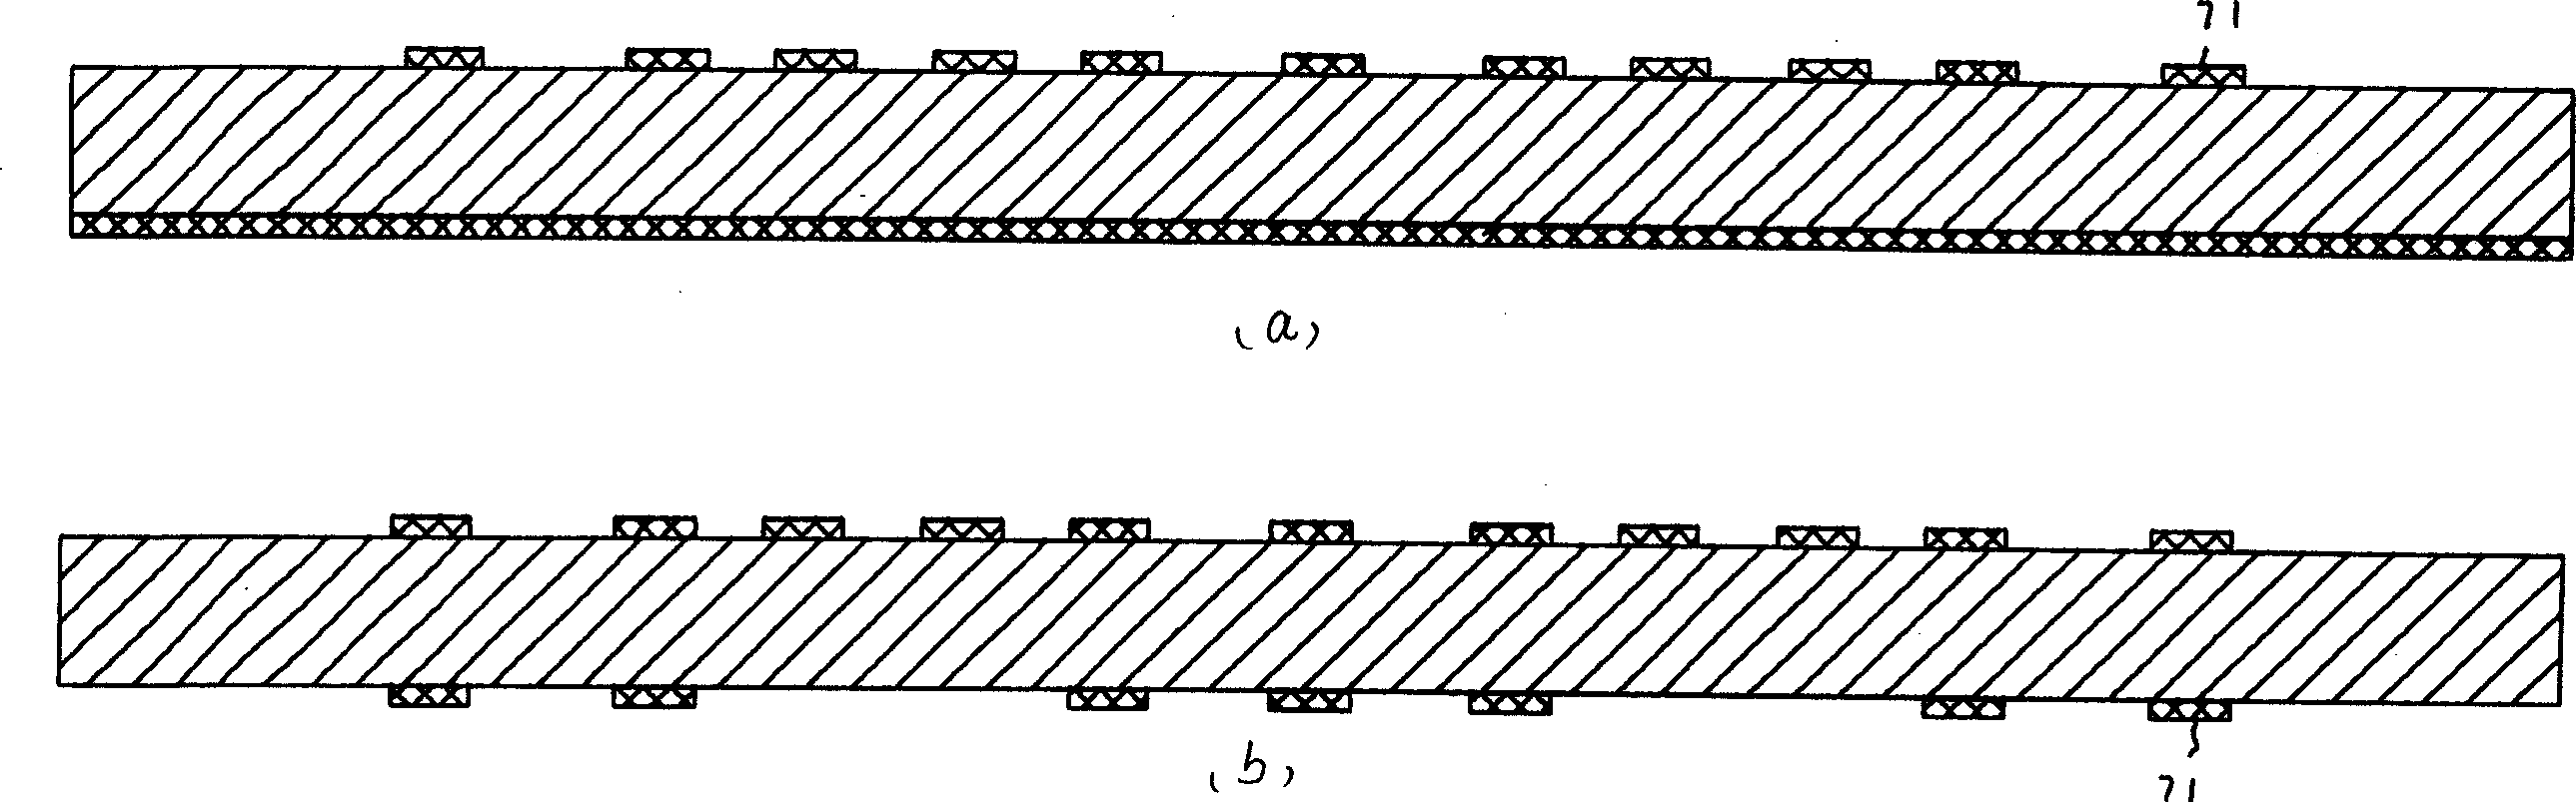 Flat-face saliant-point type packing base-board for integrated circuit or discrete device